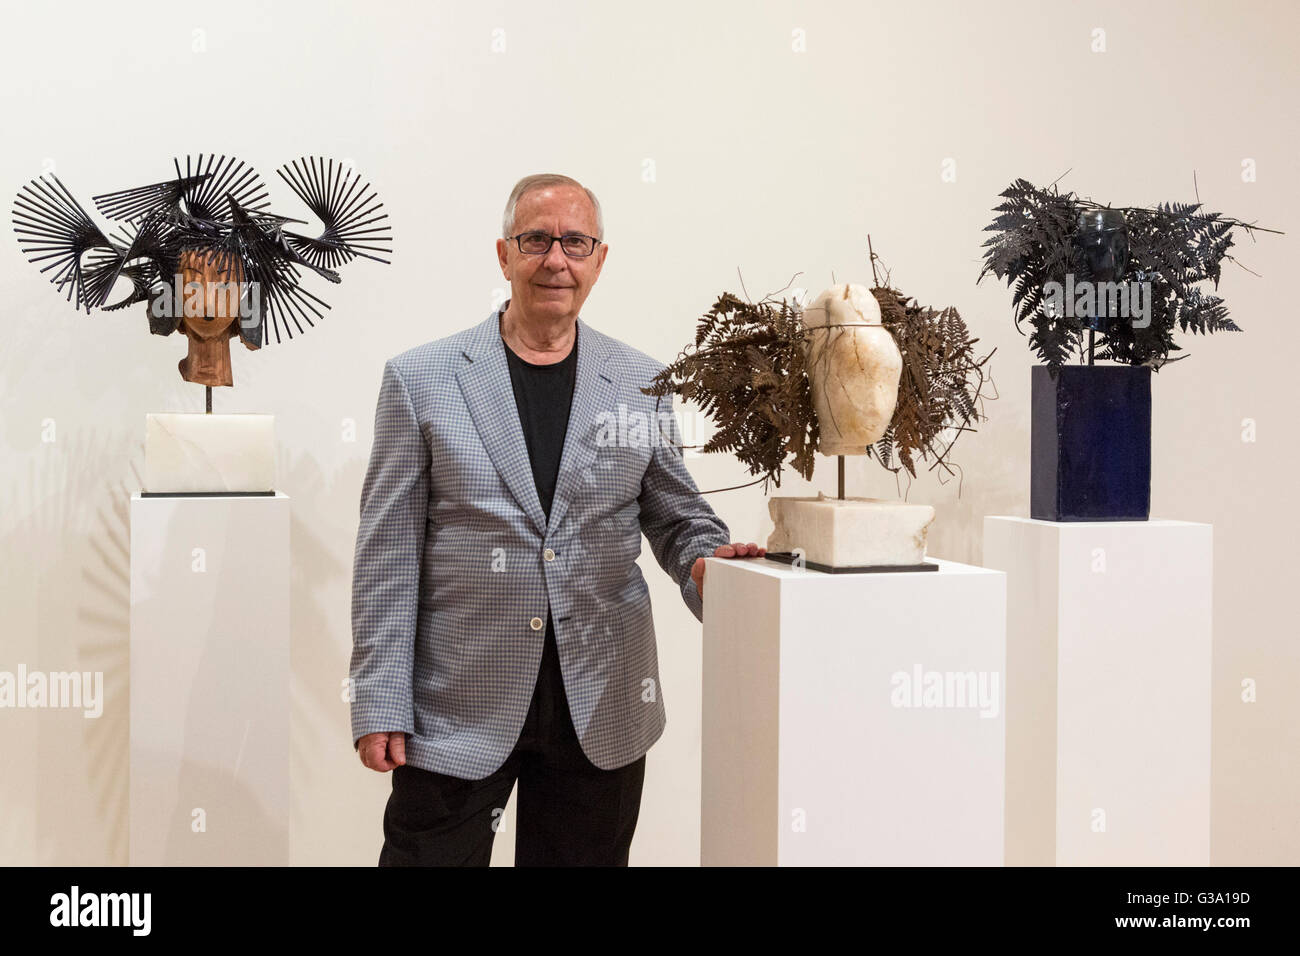 London, UK. 9 June 2016. Pictured: Spanish artist Manolo Valdes at the exhibition. Marlborough Fine Art present the exhibition Manolo Valdes: Recent Work, Paintings & Sculptures from 10 June to 16 July 2016. Stock Photo